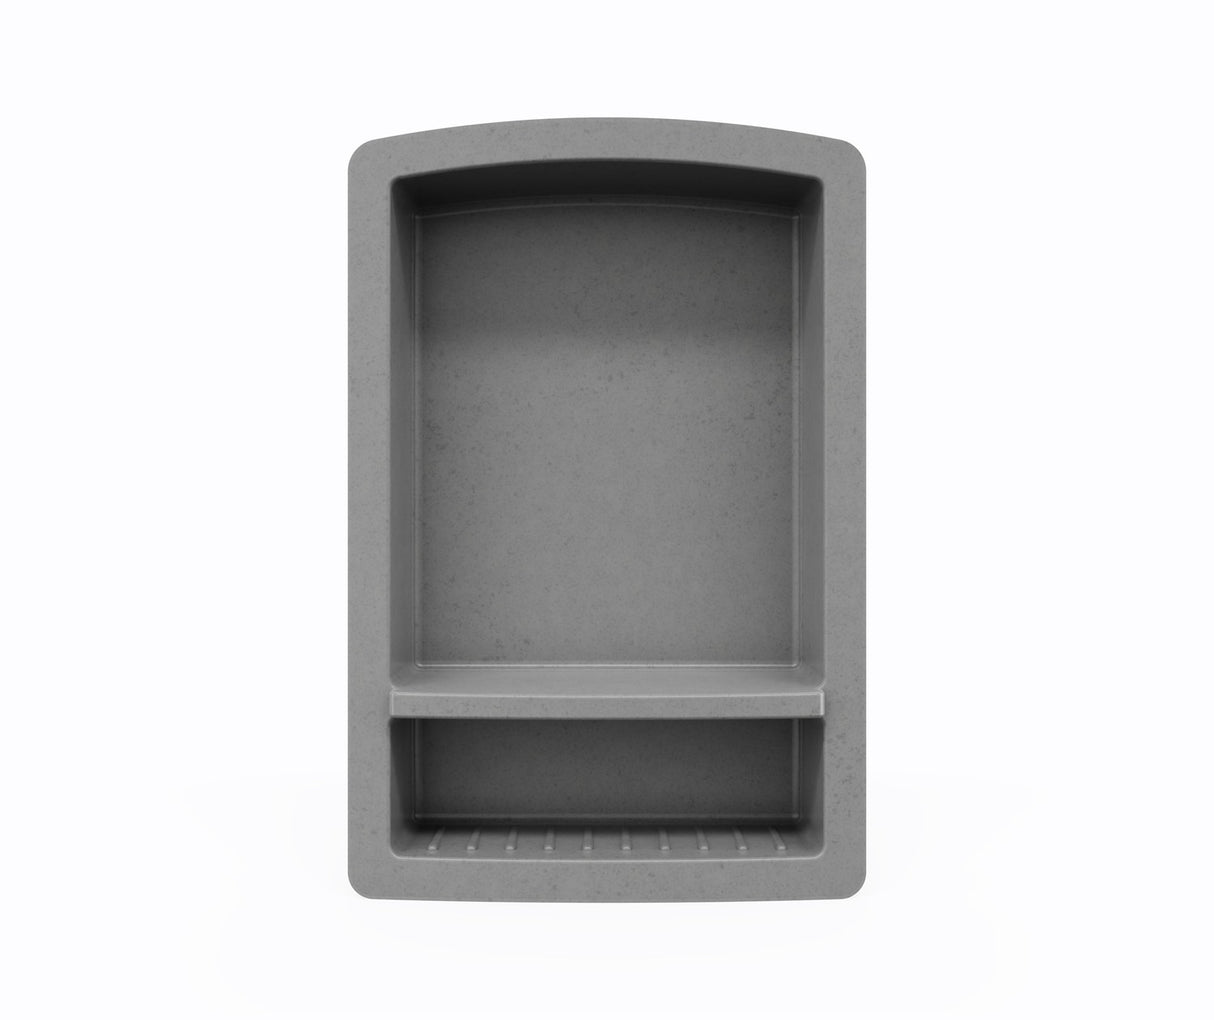 Swanstone RS-2215 Recessed Shelf in Ash Gray RS02215.203